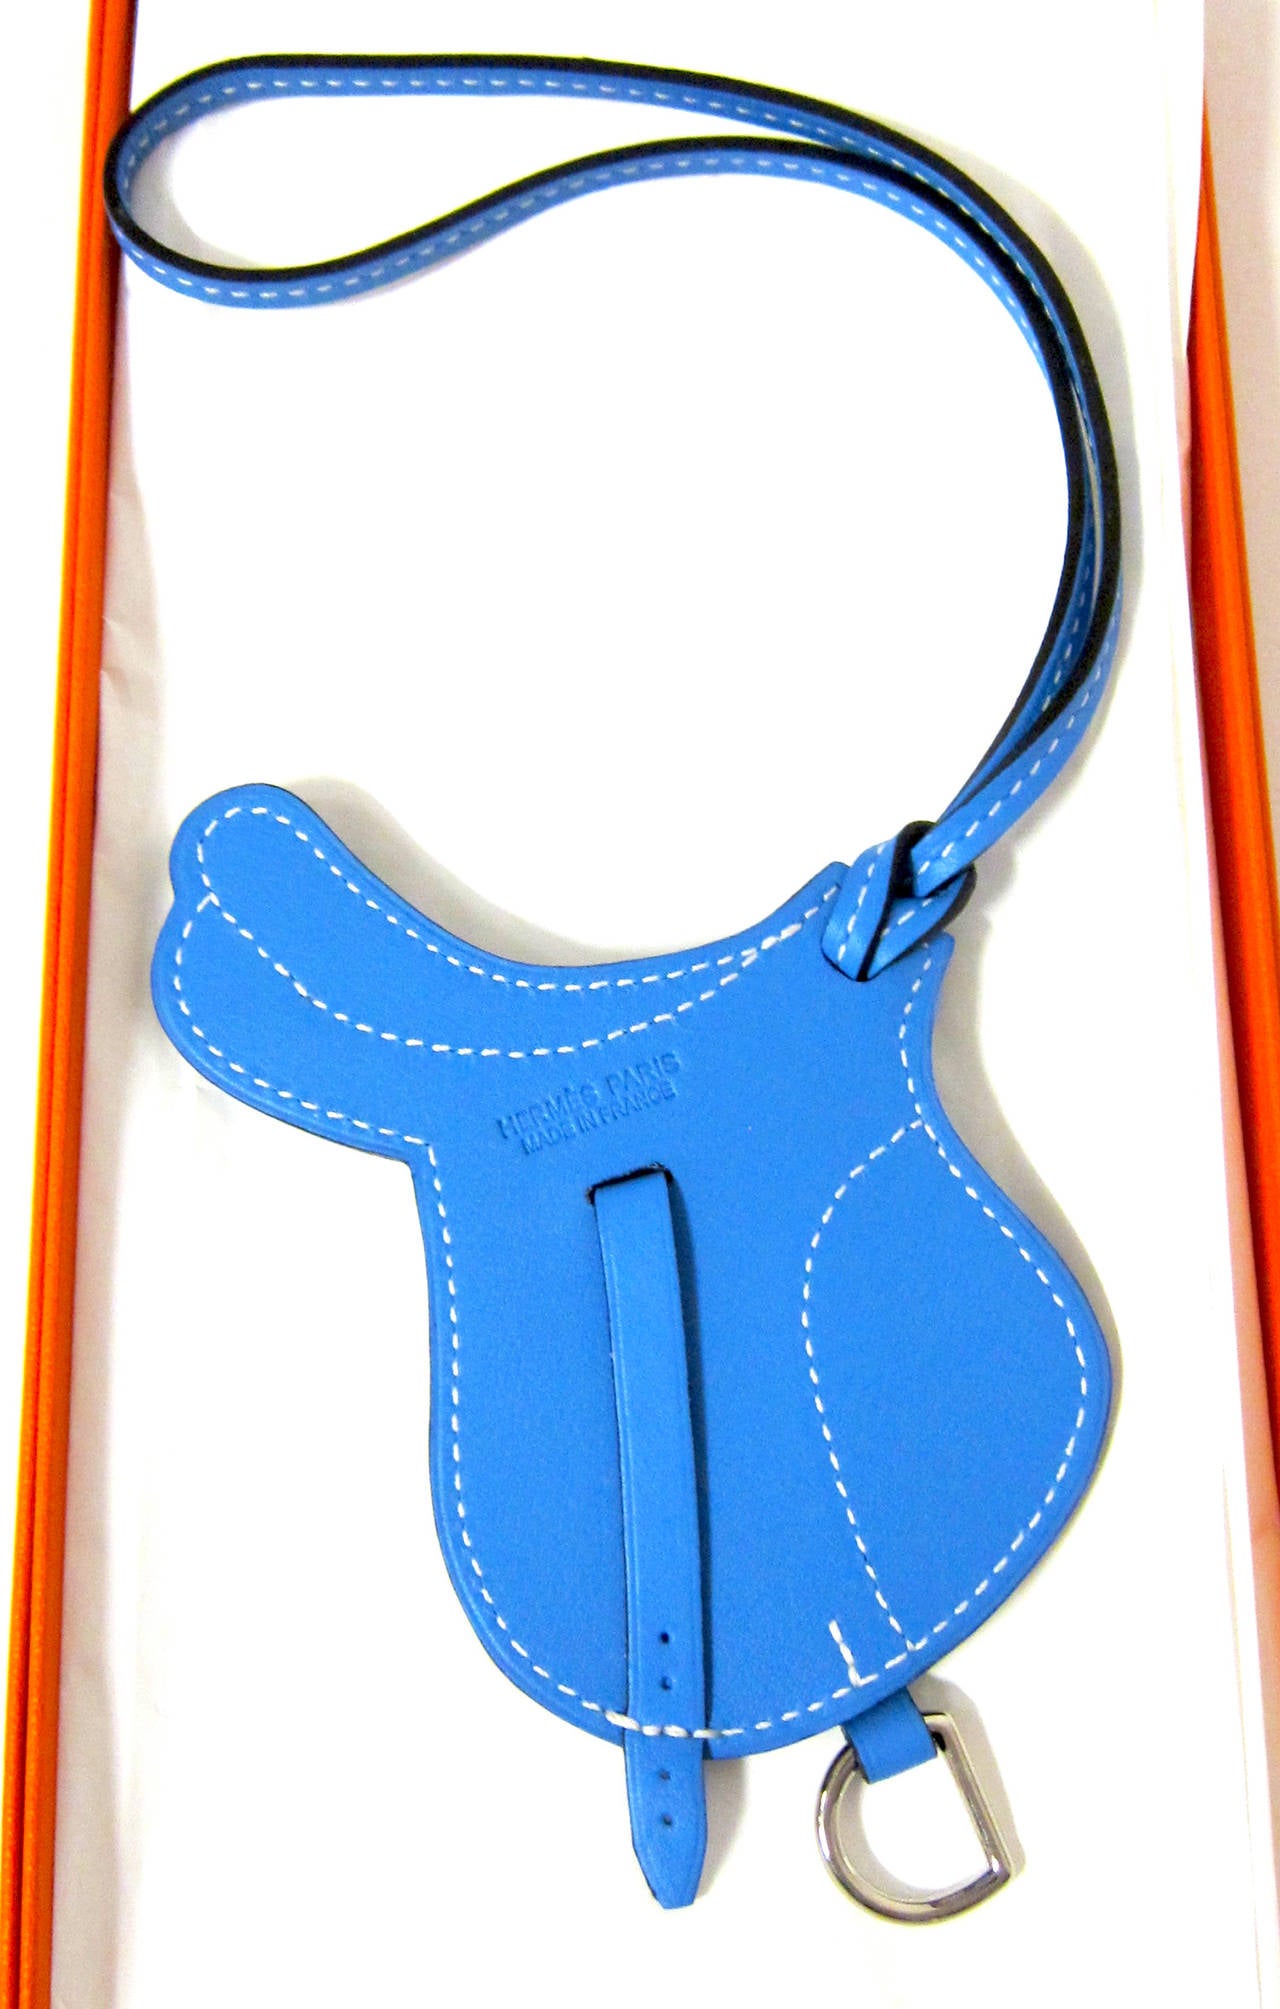 HERMES BLUE PARADIS SADDLE PADDOCK FLOT BAG CHARM 

Adorable! Brand new in box
Store fresh, never worn, coming with Hermes box and ribbon
Don't miss this buttery gorgeous Hermes Blue Paradis Saddle Paddock Selle Bag Charm, perfect for any